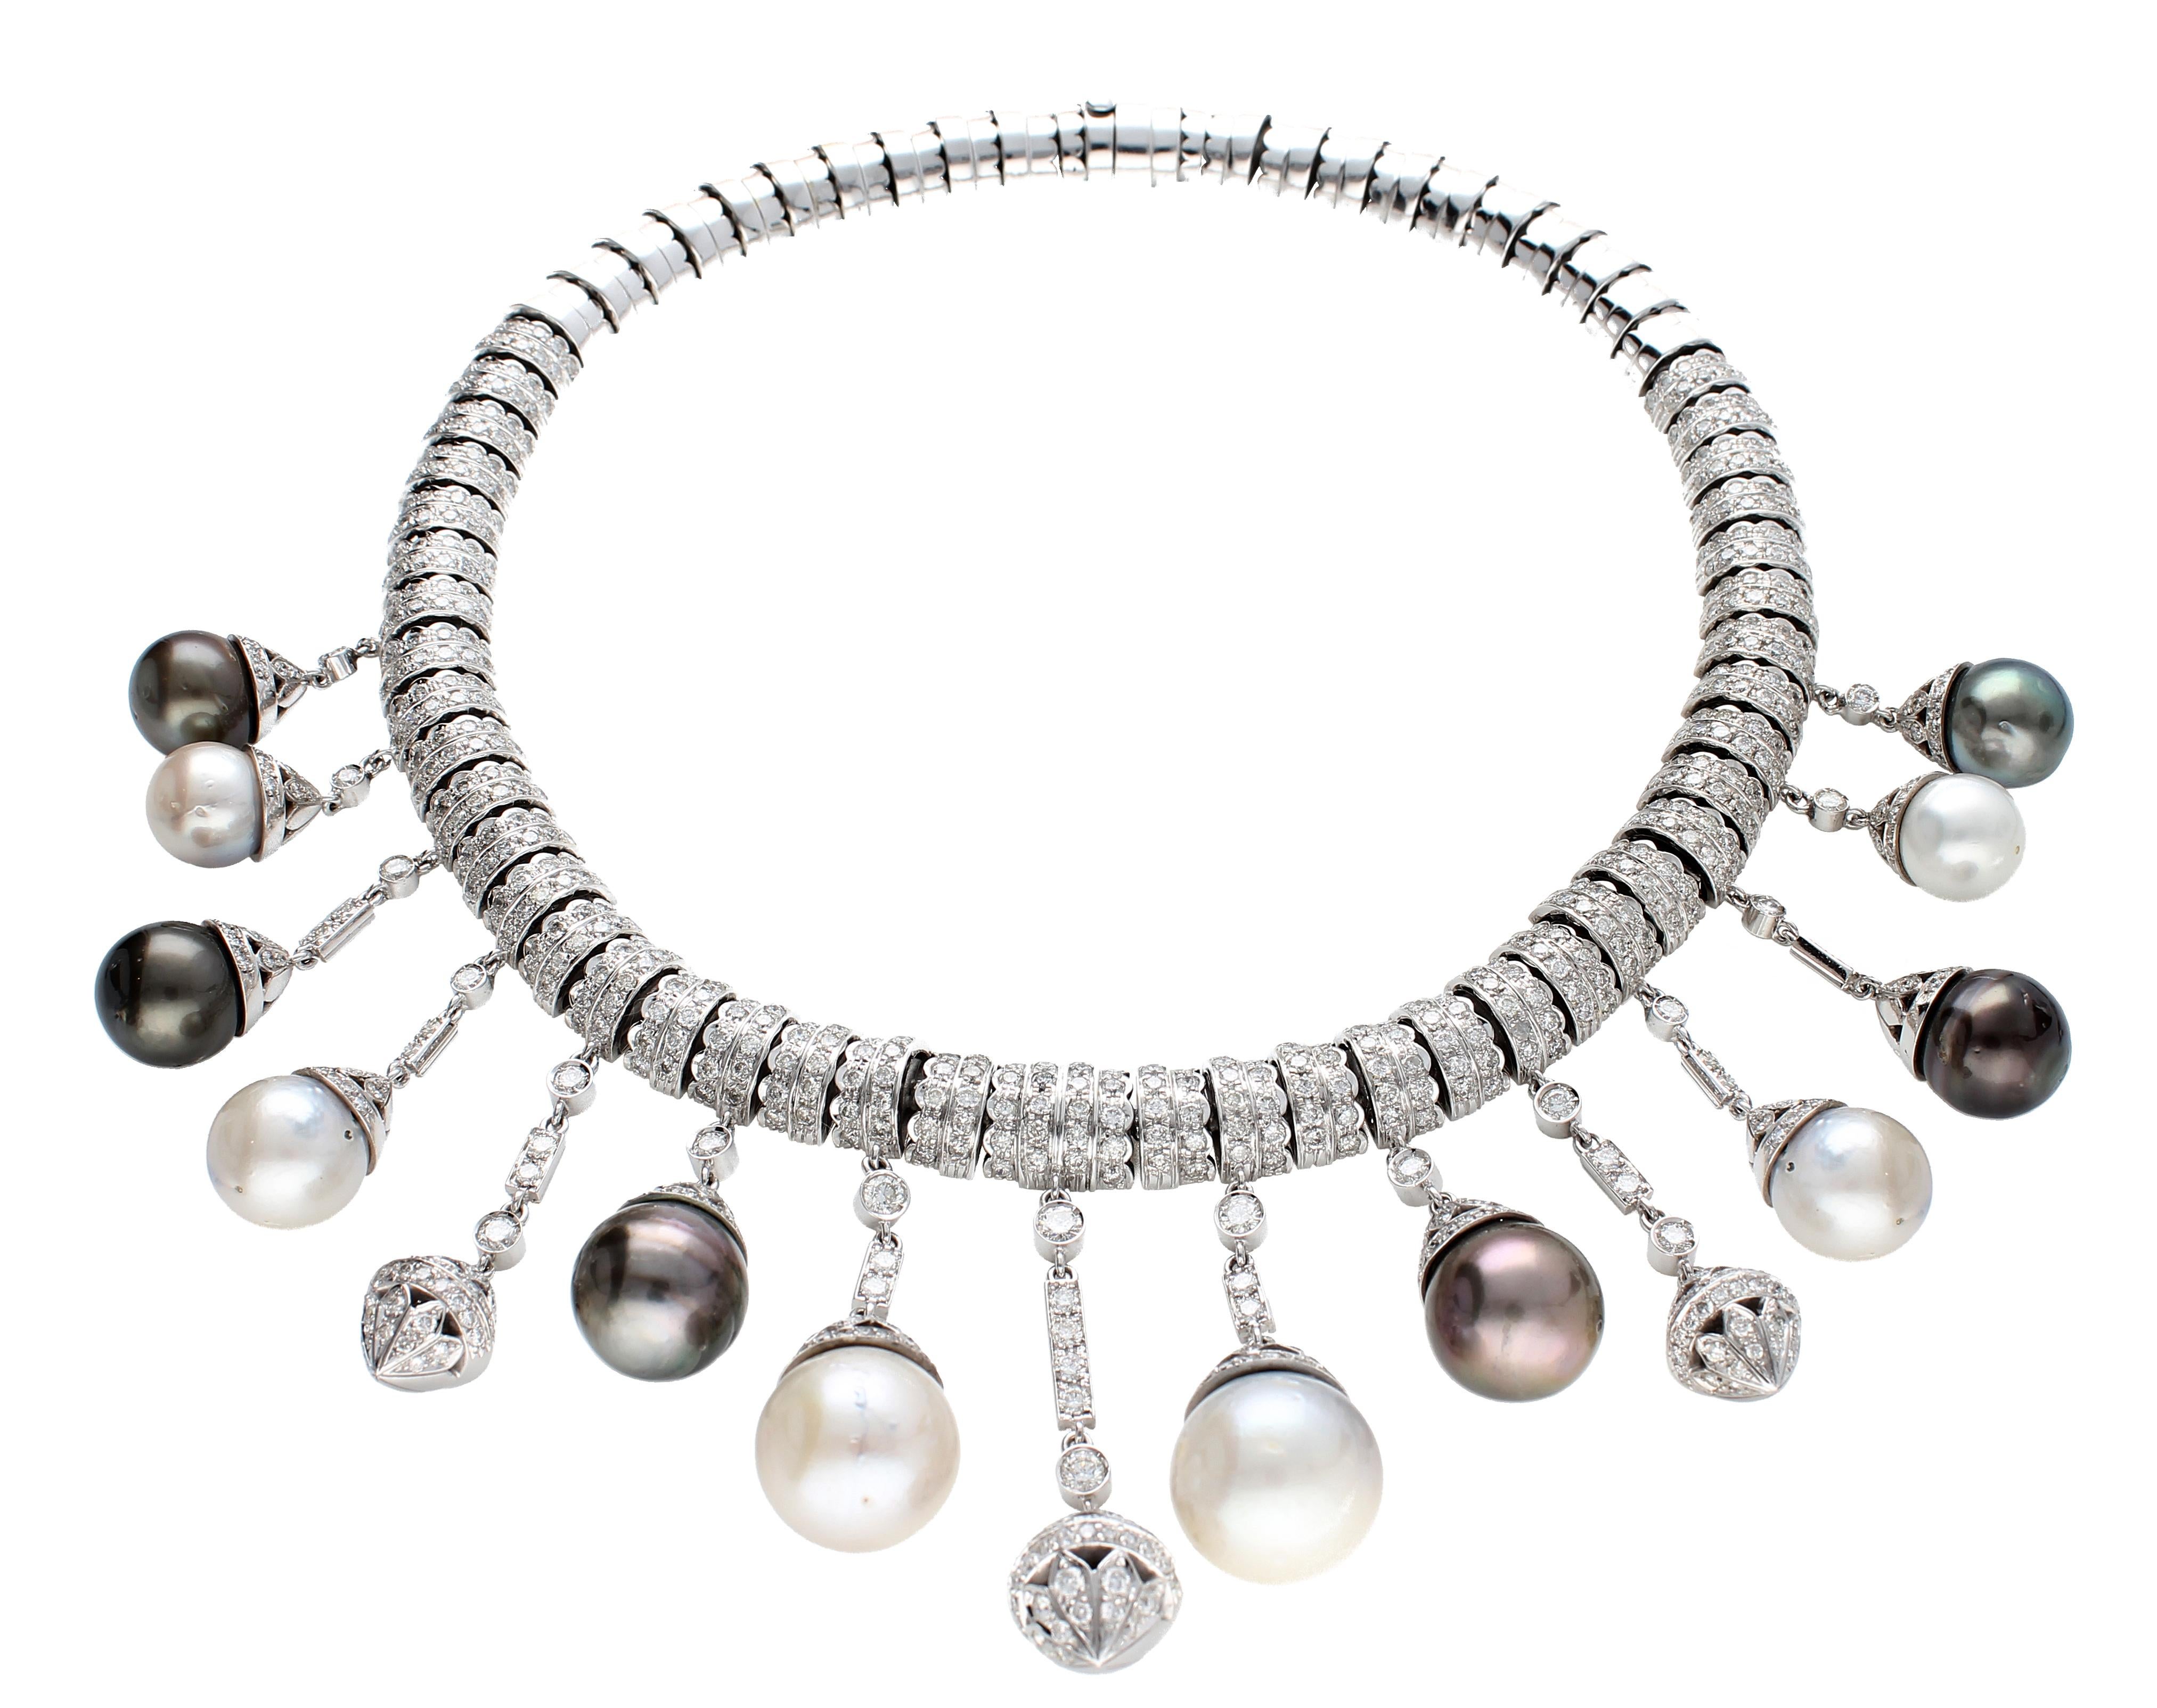 Necklace White Gold and Diamonds, Pendants with White and Black Pearls S.S. For Sale 9